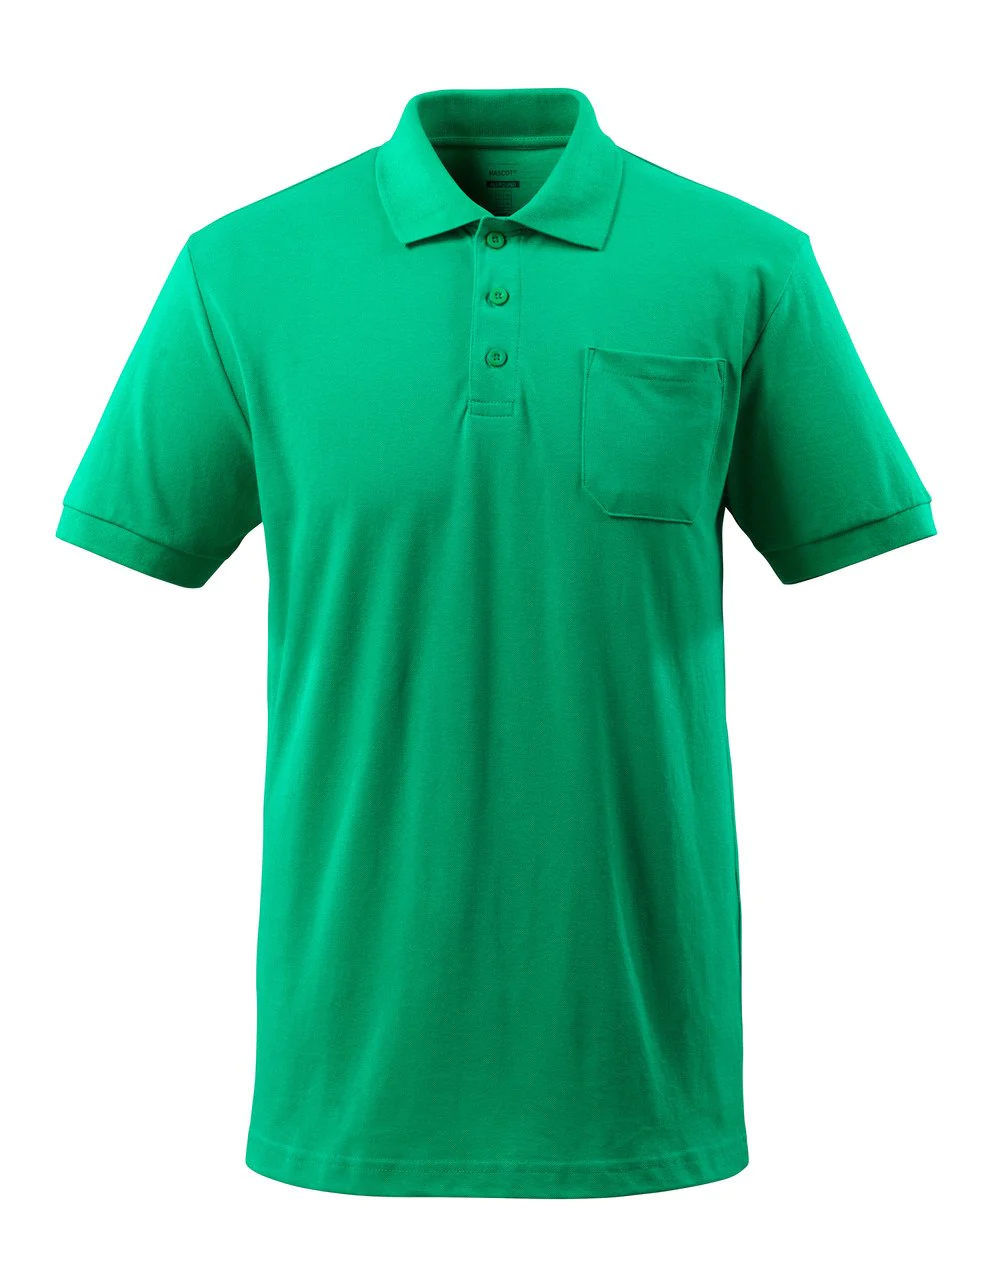 Workwear Polo Shirt Supplier And Wholesaler In Kuwait